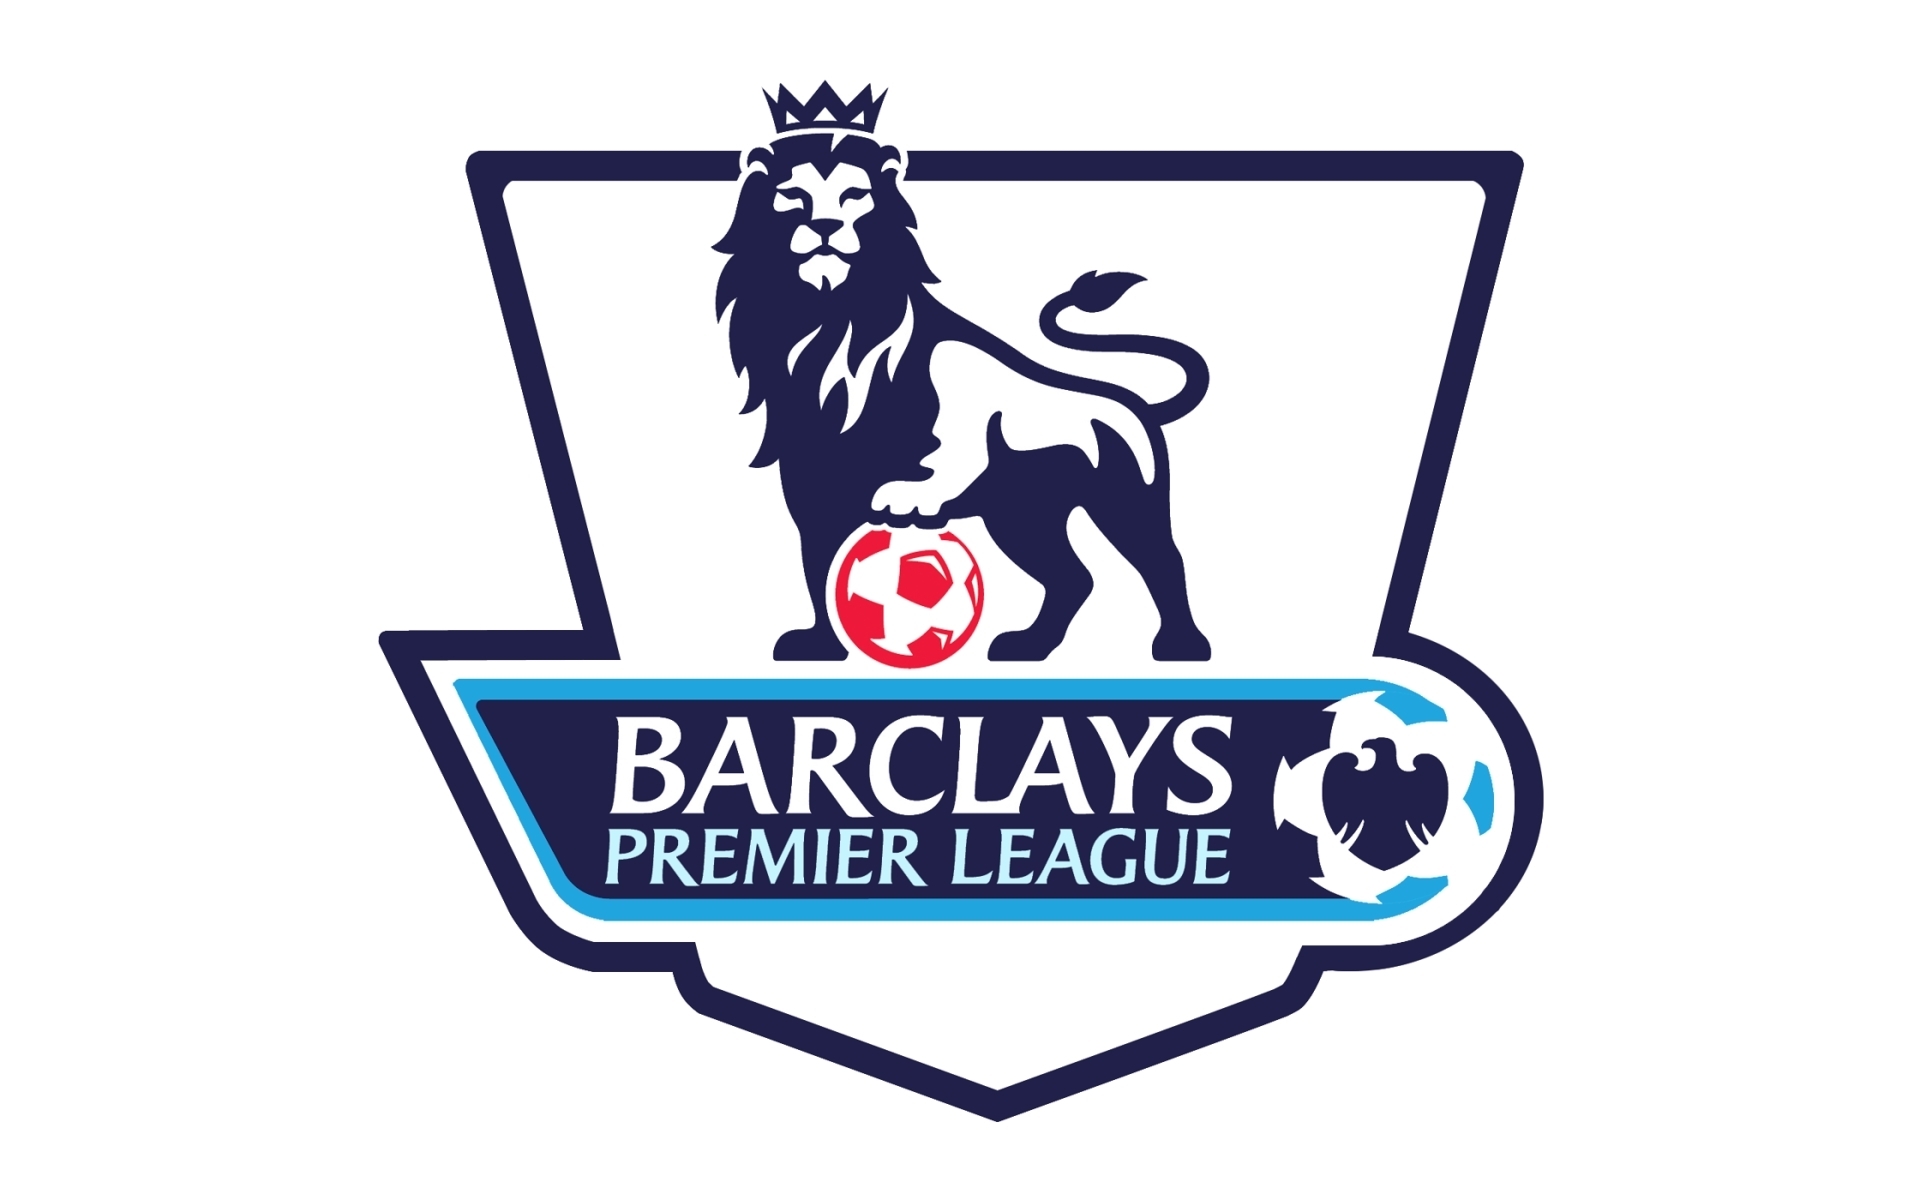 A Look into how Premier League has become the most watched league in the world